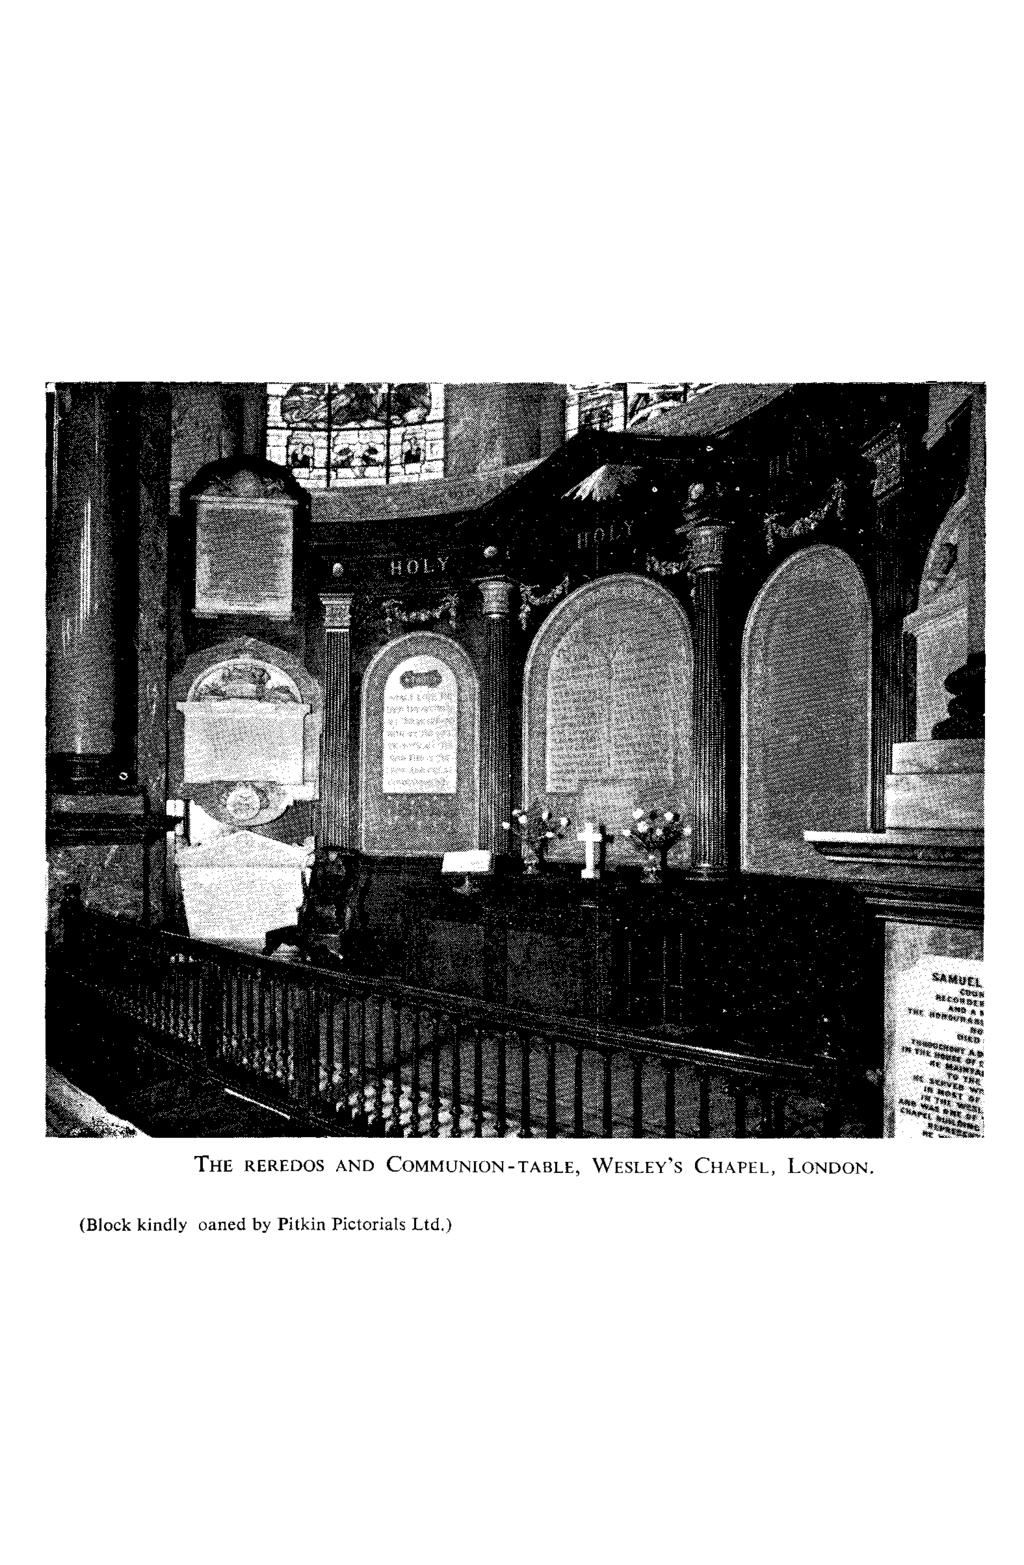 THE REREDOS AND COMMUNION-TABLE, WESLEY'S CHAPEL,